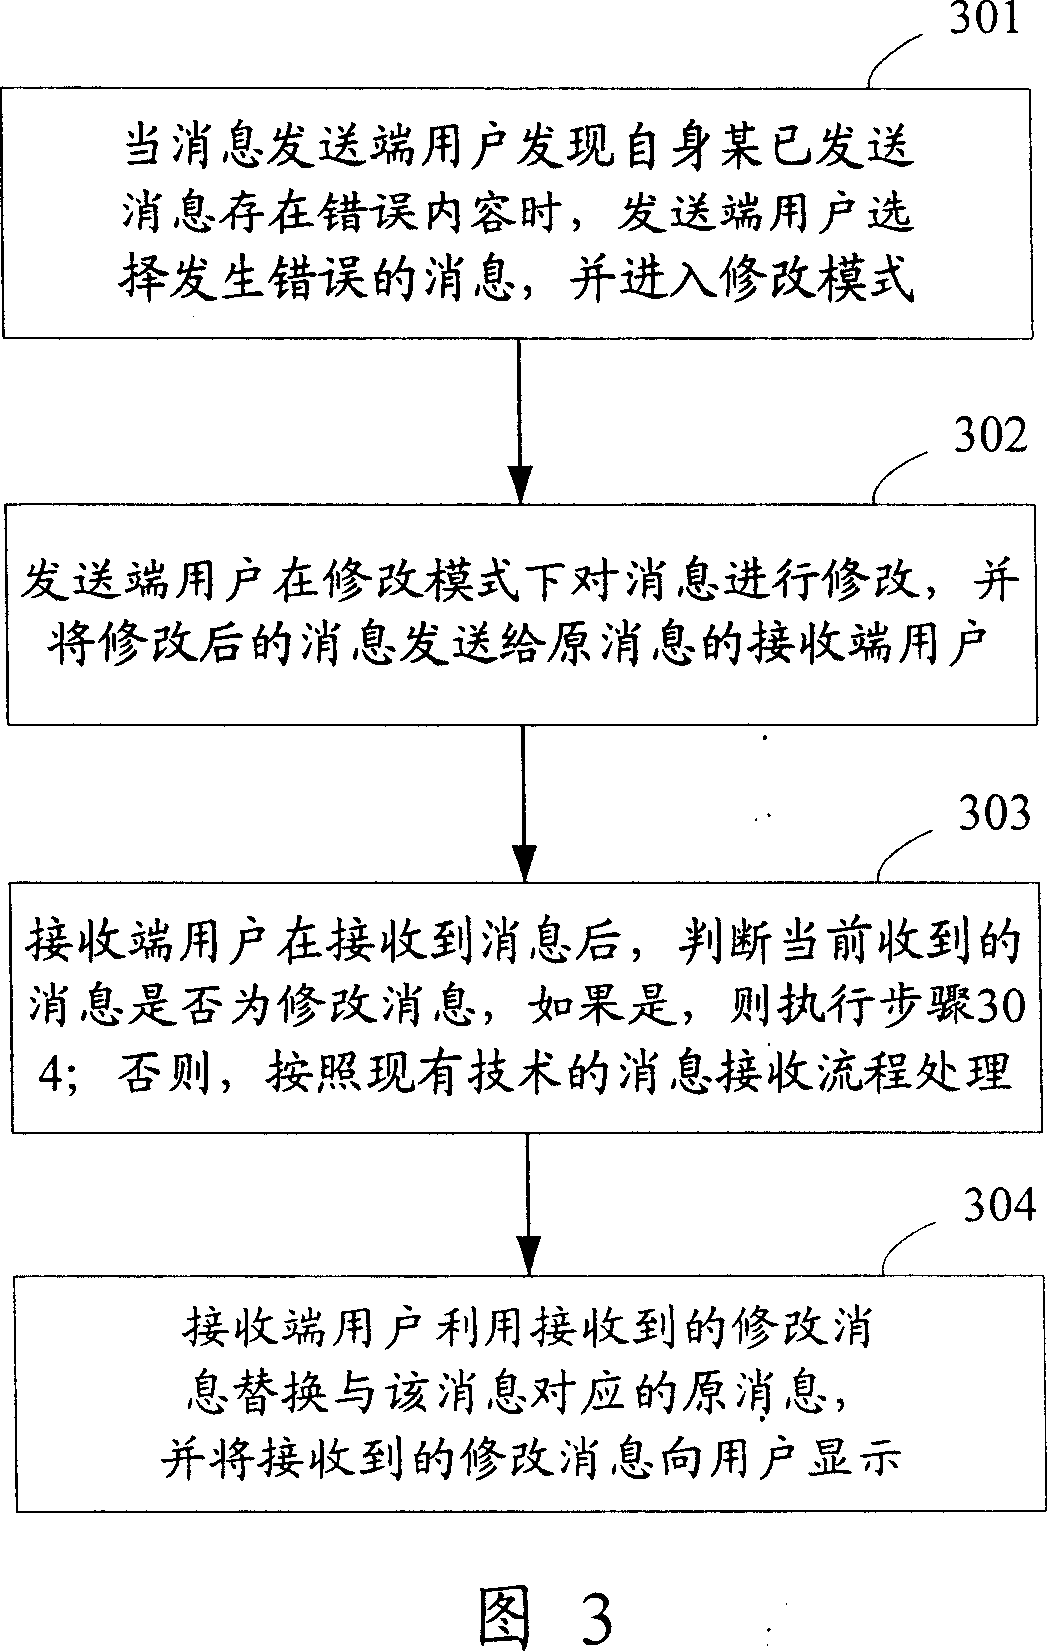 Method for amending transmitted message and immediate communication device